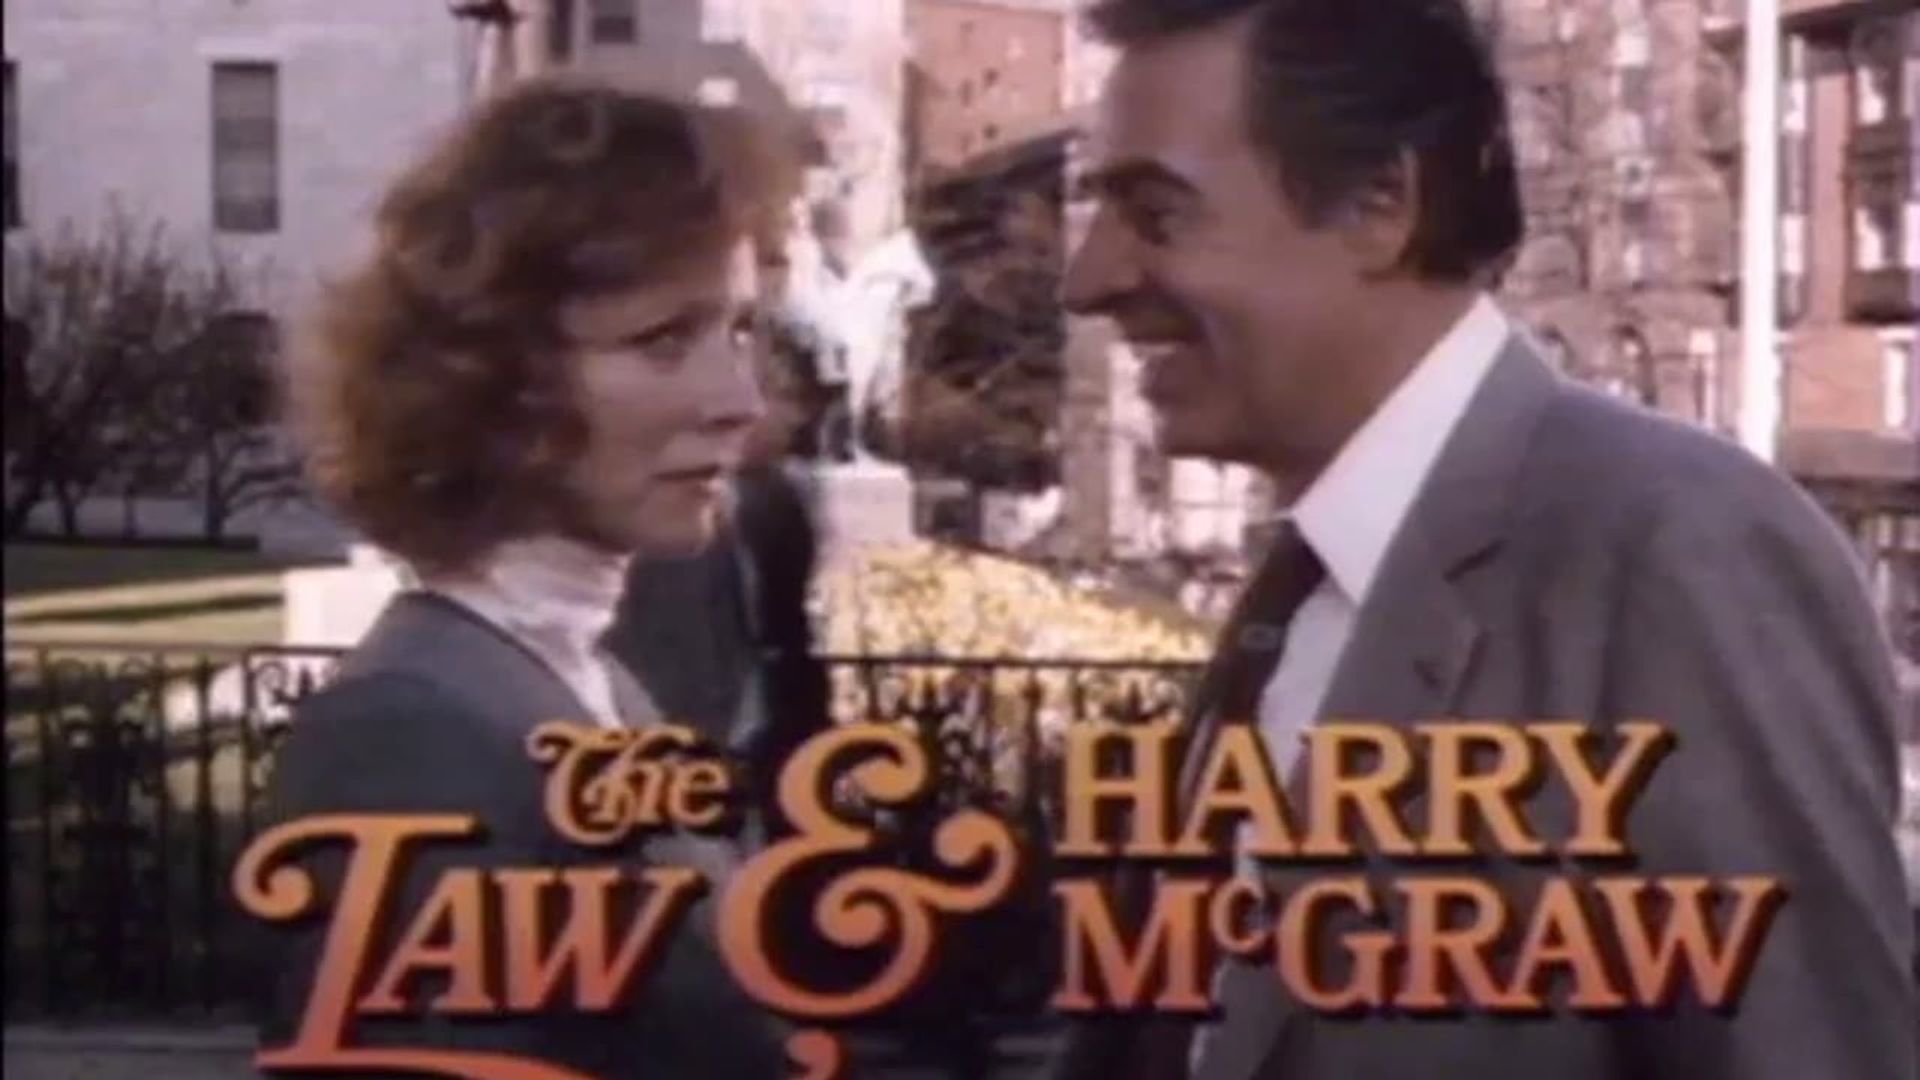 The Law and Harry McGraw background